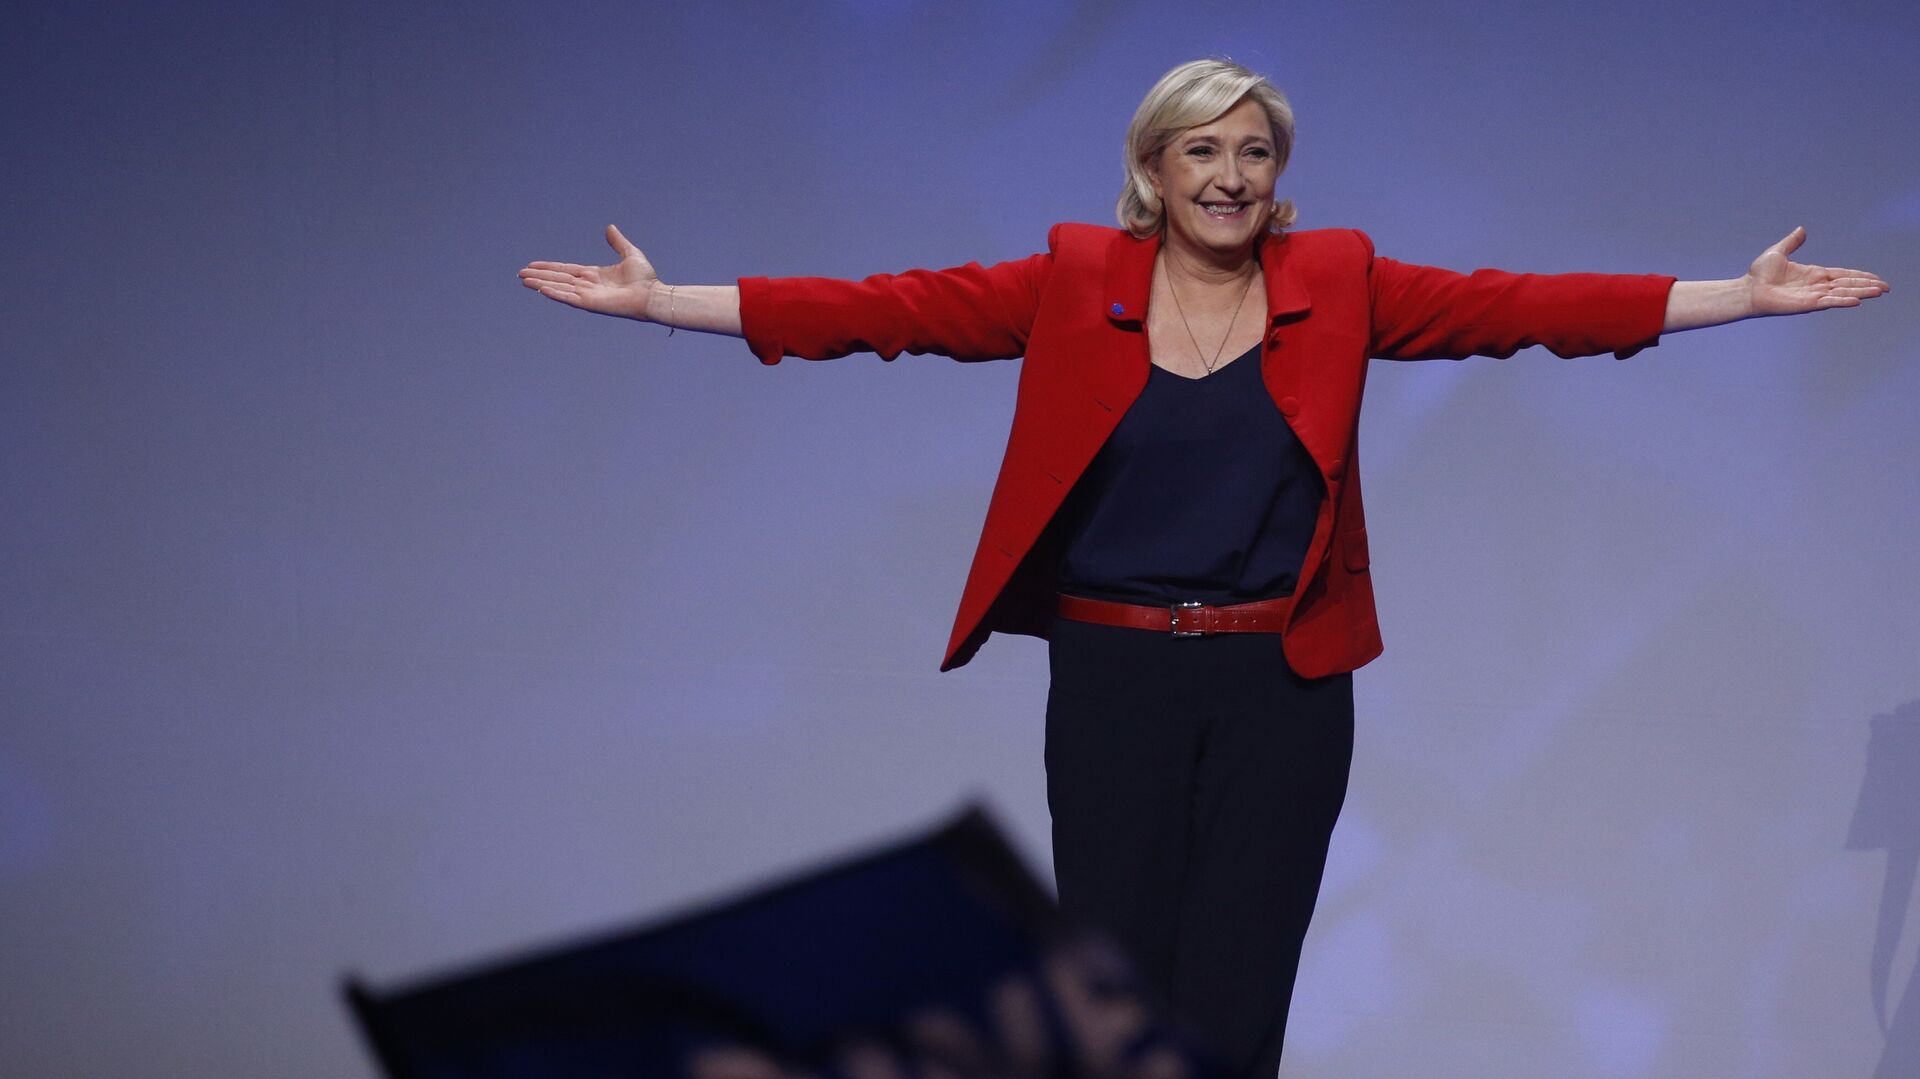 Marine Le Pen, French National Front (FN) political party leader and candidate for French 2017 presidential election, attends a campaign rally in Paris, France, April 17, 2017. - Sputnik International, 1920, 10.10.2021